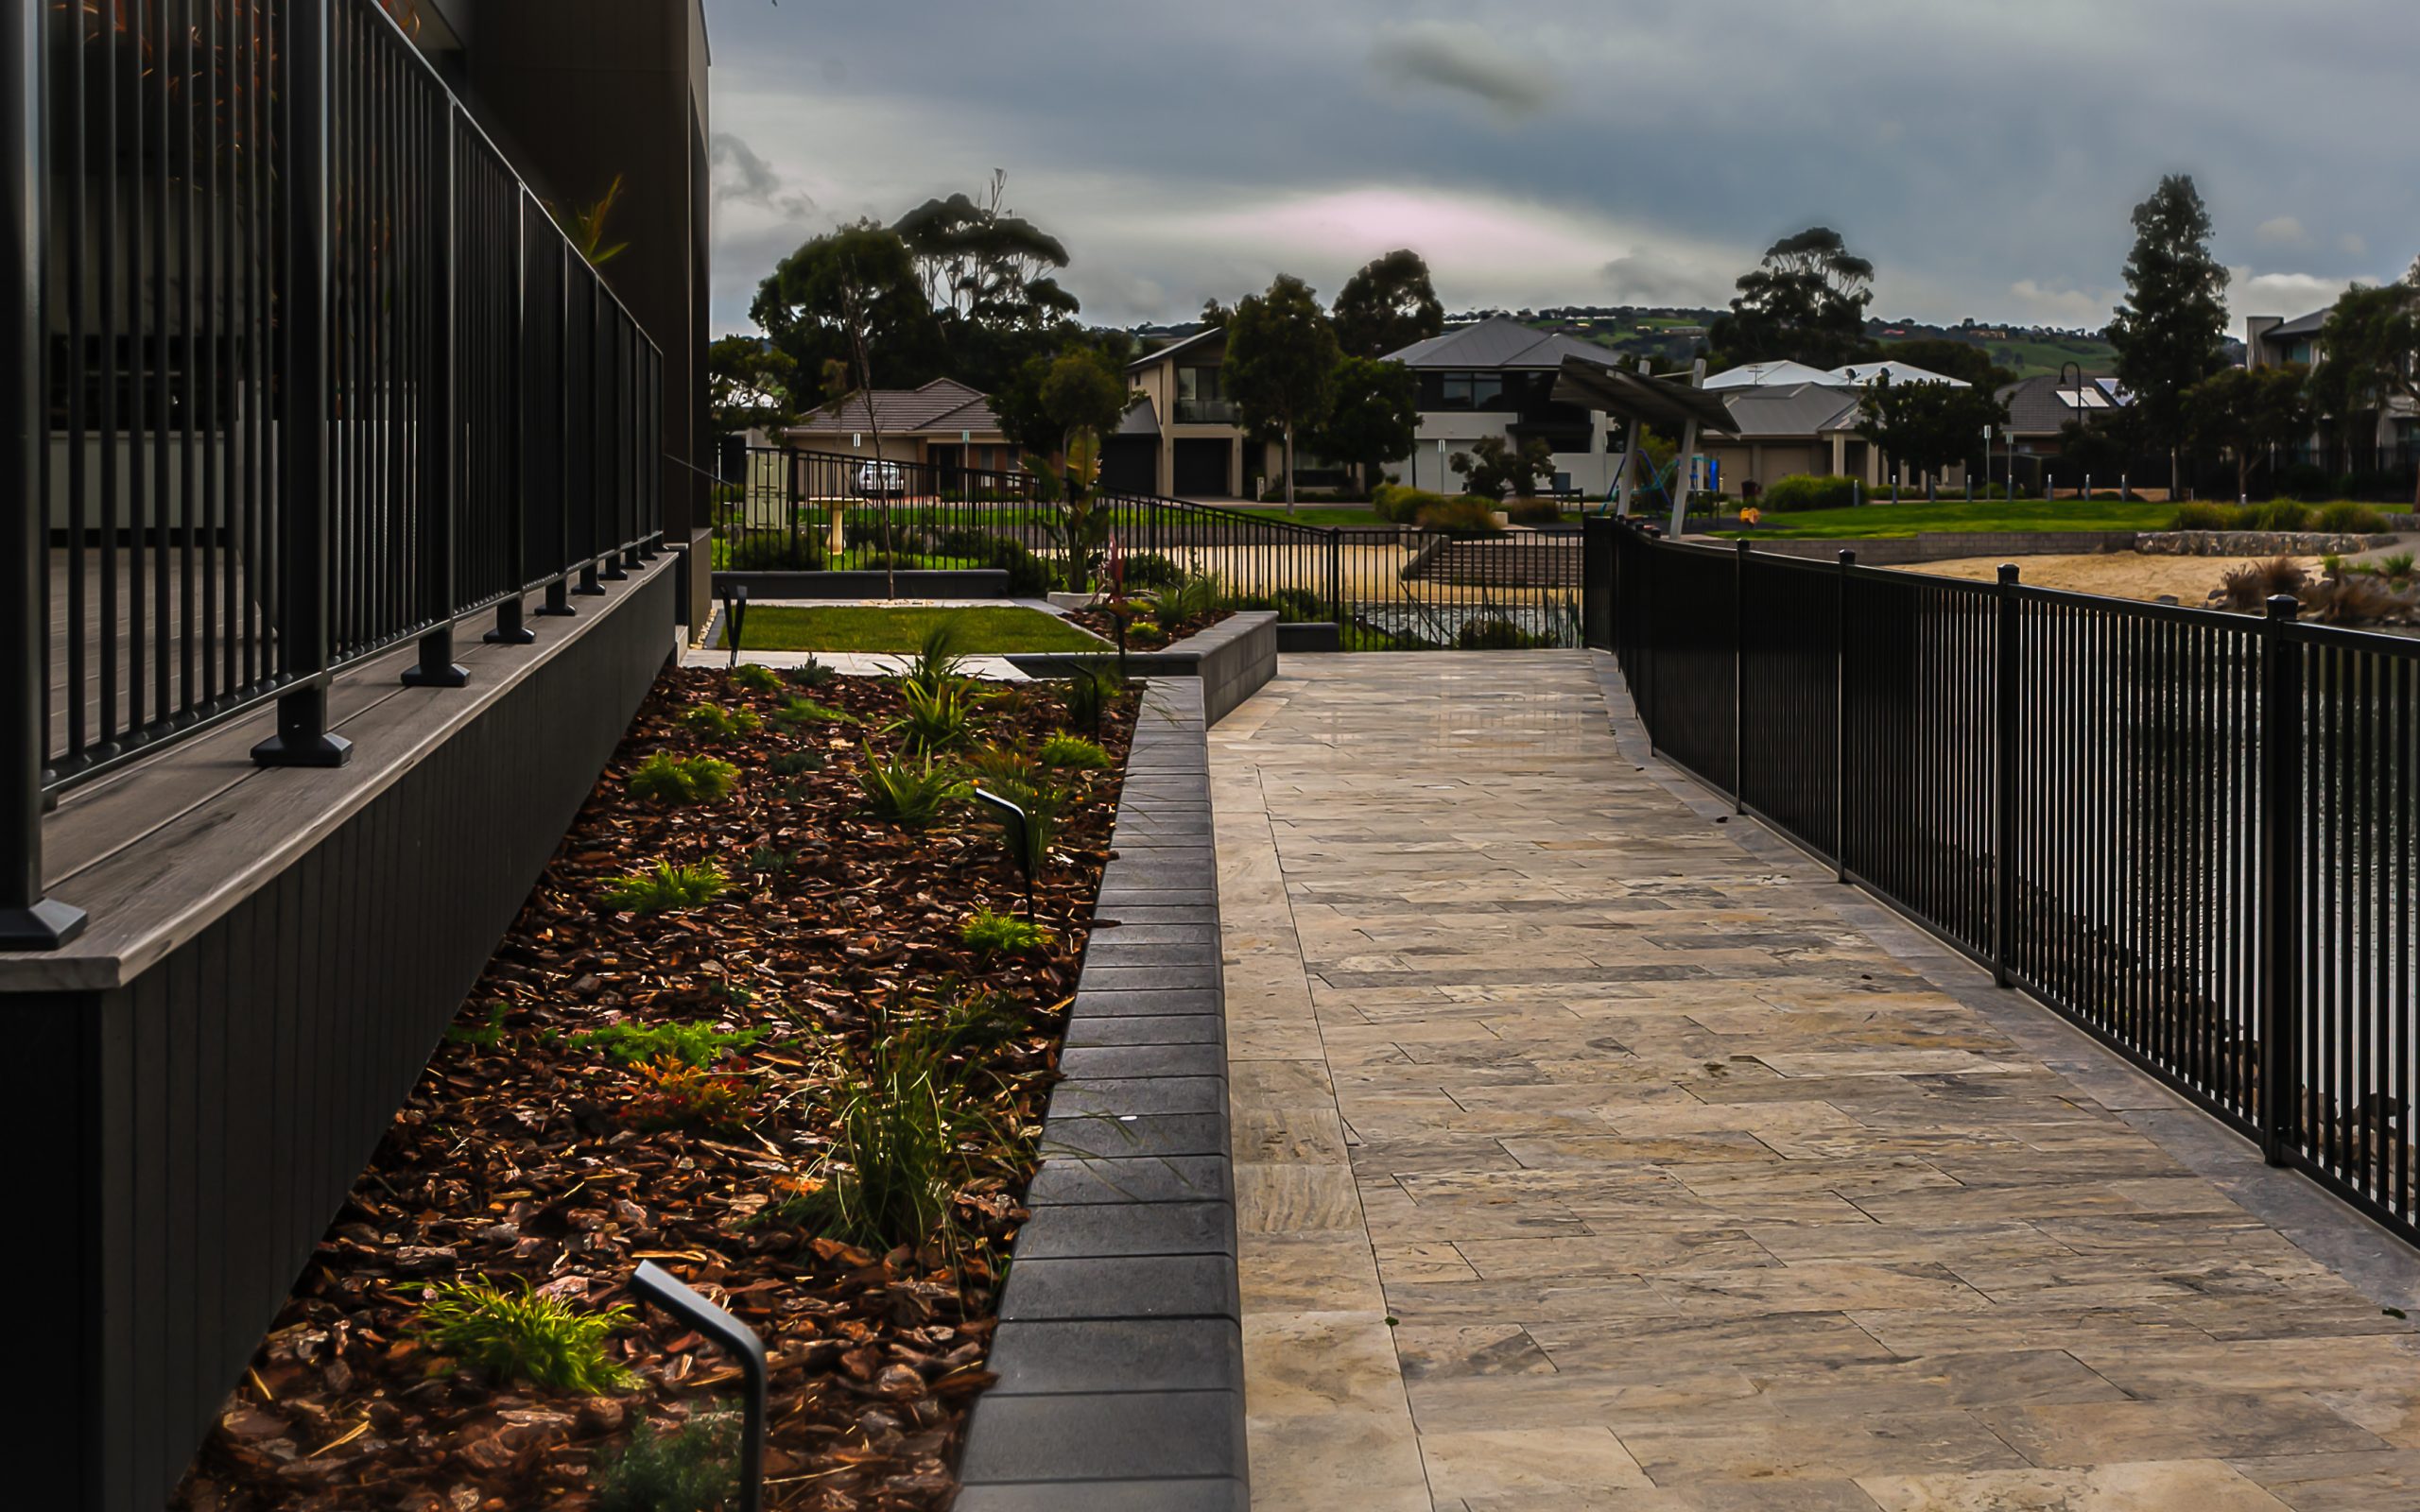 Paving Contractors, Paving, Pavers, Retaining Wall, Raised Garden Beds, Landscaping, Landscapers, Landscaping Designs, Irrigation, Fencing, Fencing Contractors, Decking, WCHF, Women and Children's Hospital Foundation, Victor Harbor, Fleurieu